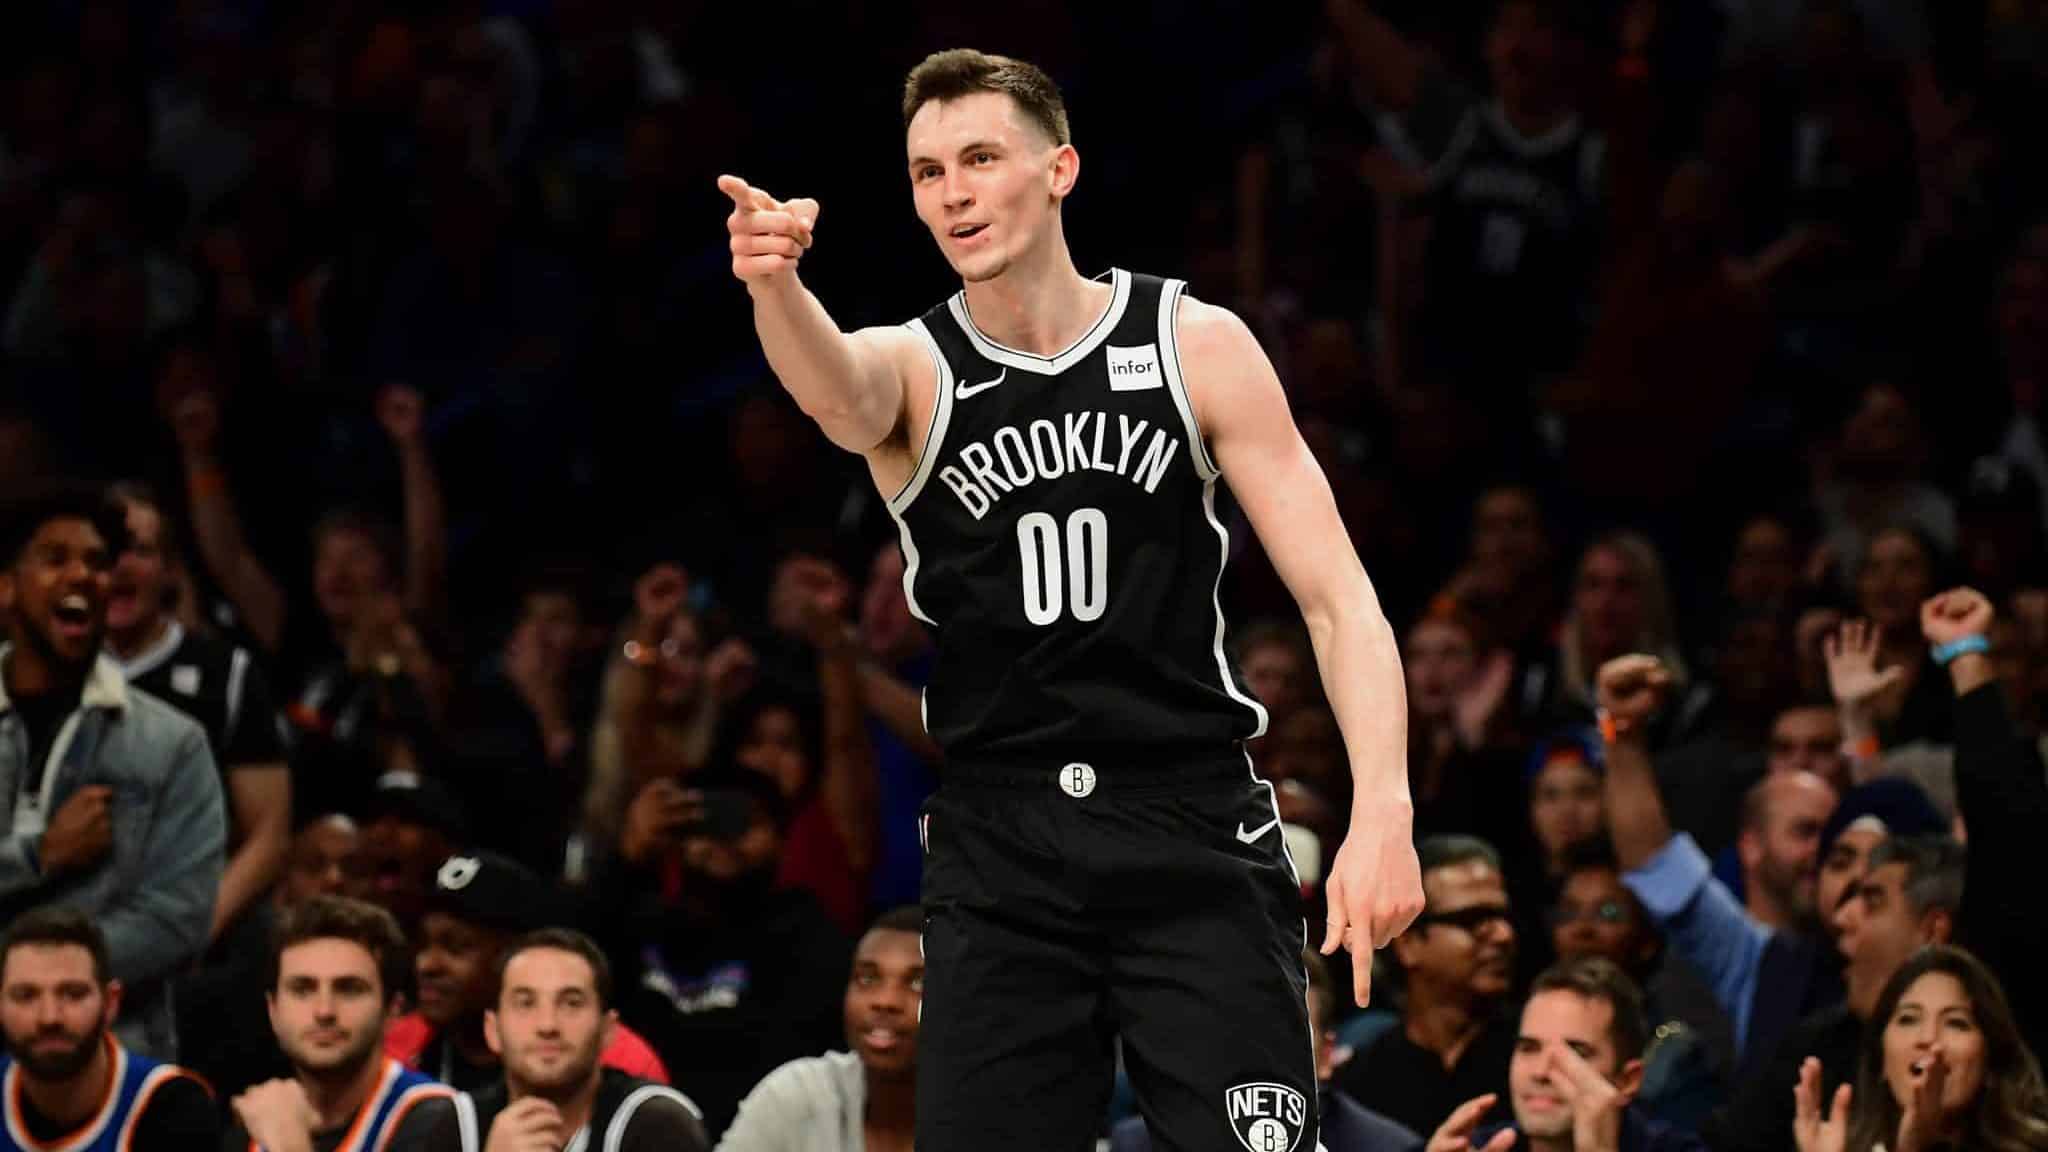 NEW YORK, NEW YORK - OCTOBER 25: Rodions Kurucs #00 of the Brooklyn Nets celebrates his three-pointer in the first half of their game against the New York Knicks at Barclays Center on October 25, 2019 in the Brooklyn borough of New York City. NOTE TO USER: User expressly acknowledges and agrees that, by downloading and or using this photograph, User is consenting to the terms and conditions of the Getty Images License Agreement.